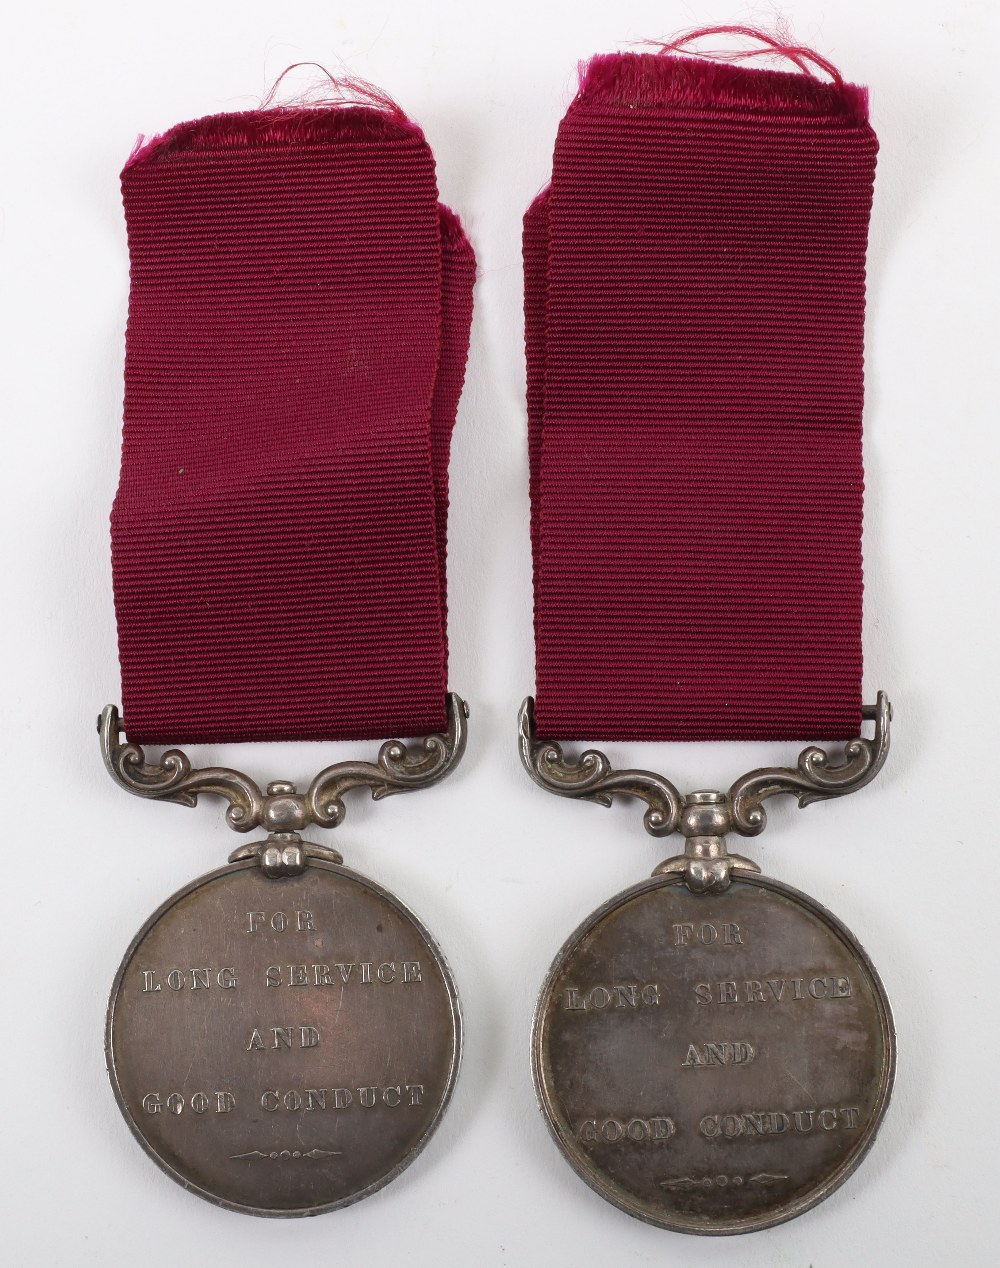 An Interesting Pair of Victorian Army Long Service Medals Both Issued to a Sergeant James Pickles in - Image 2 of 3